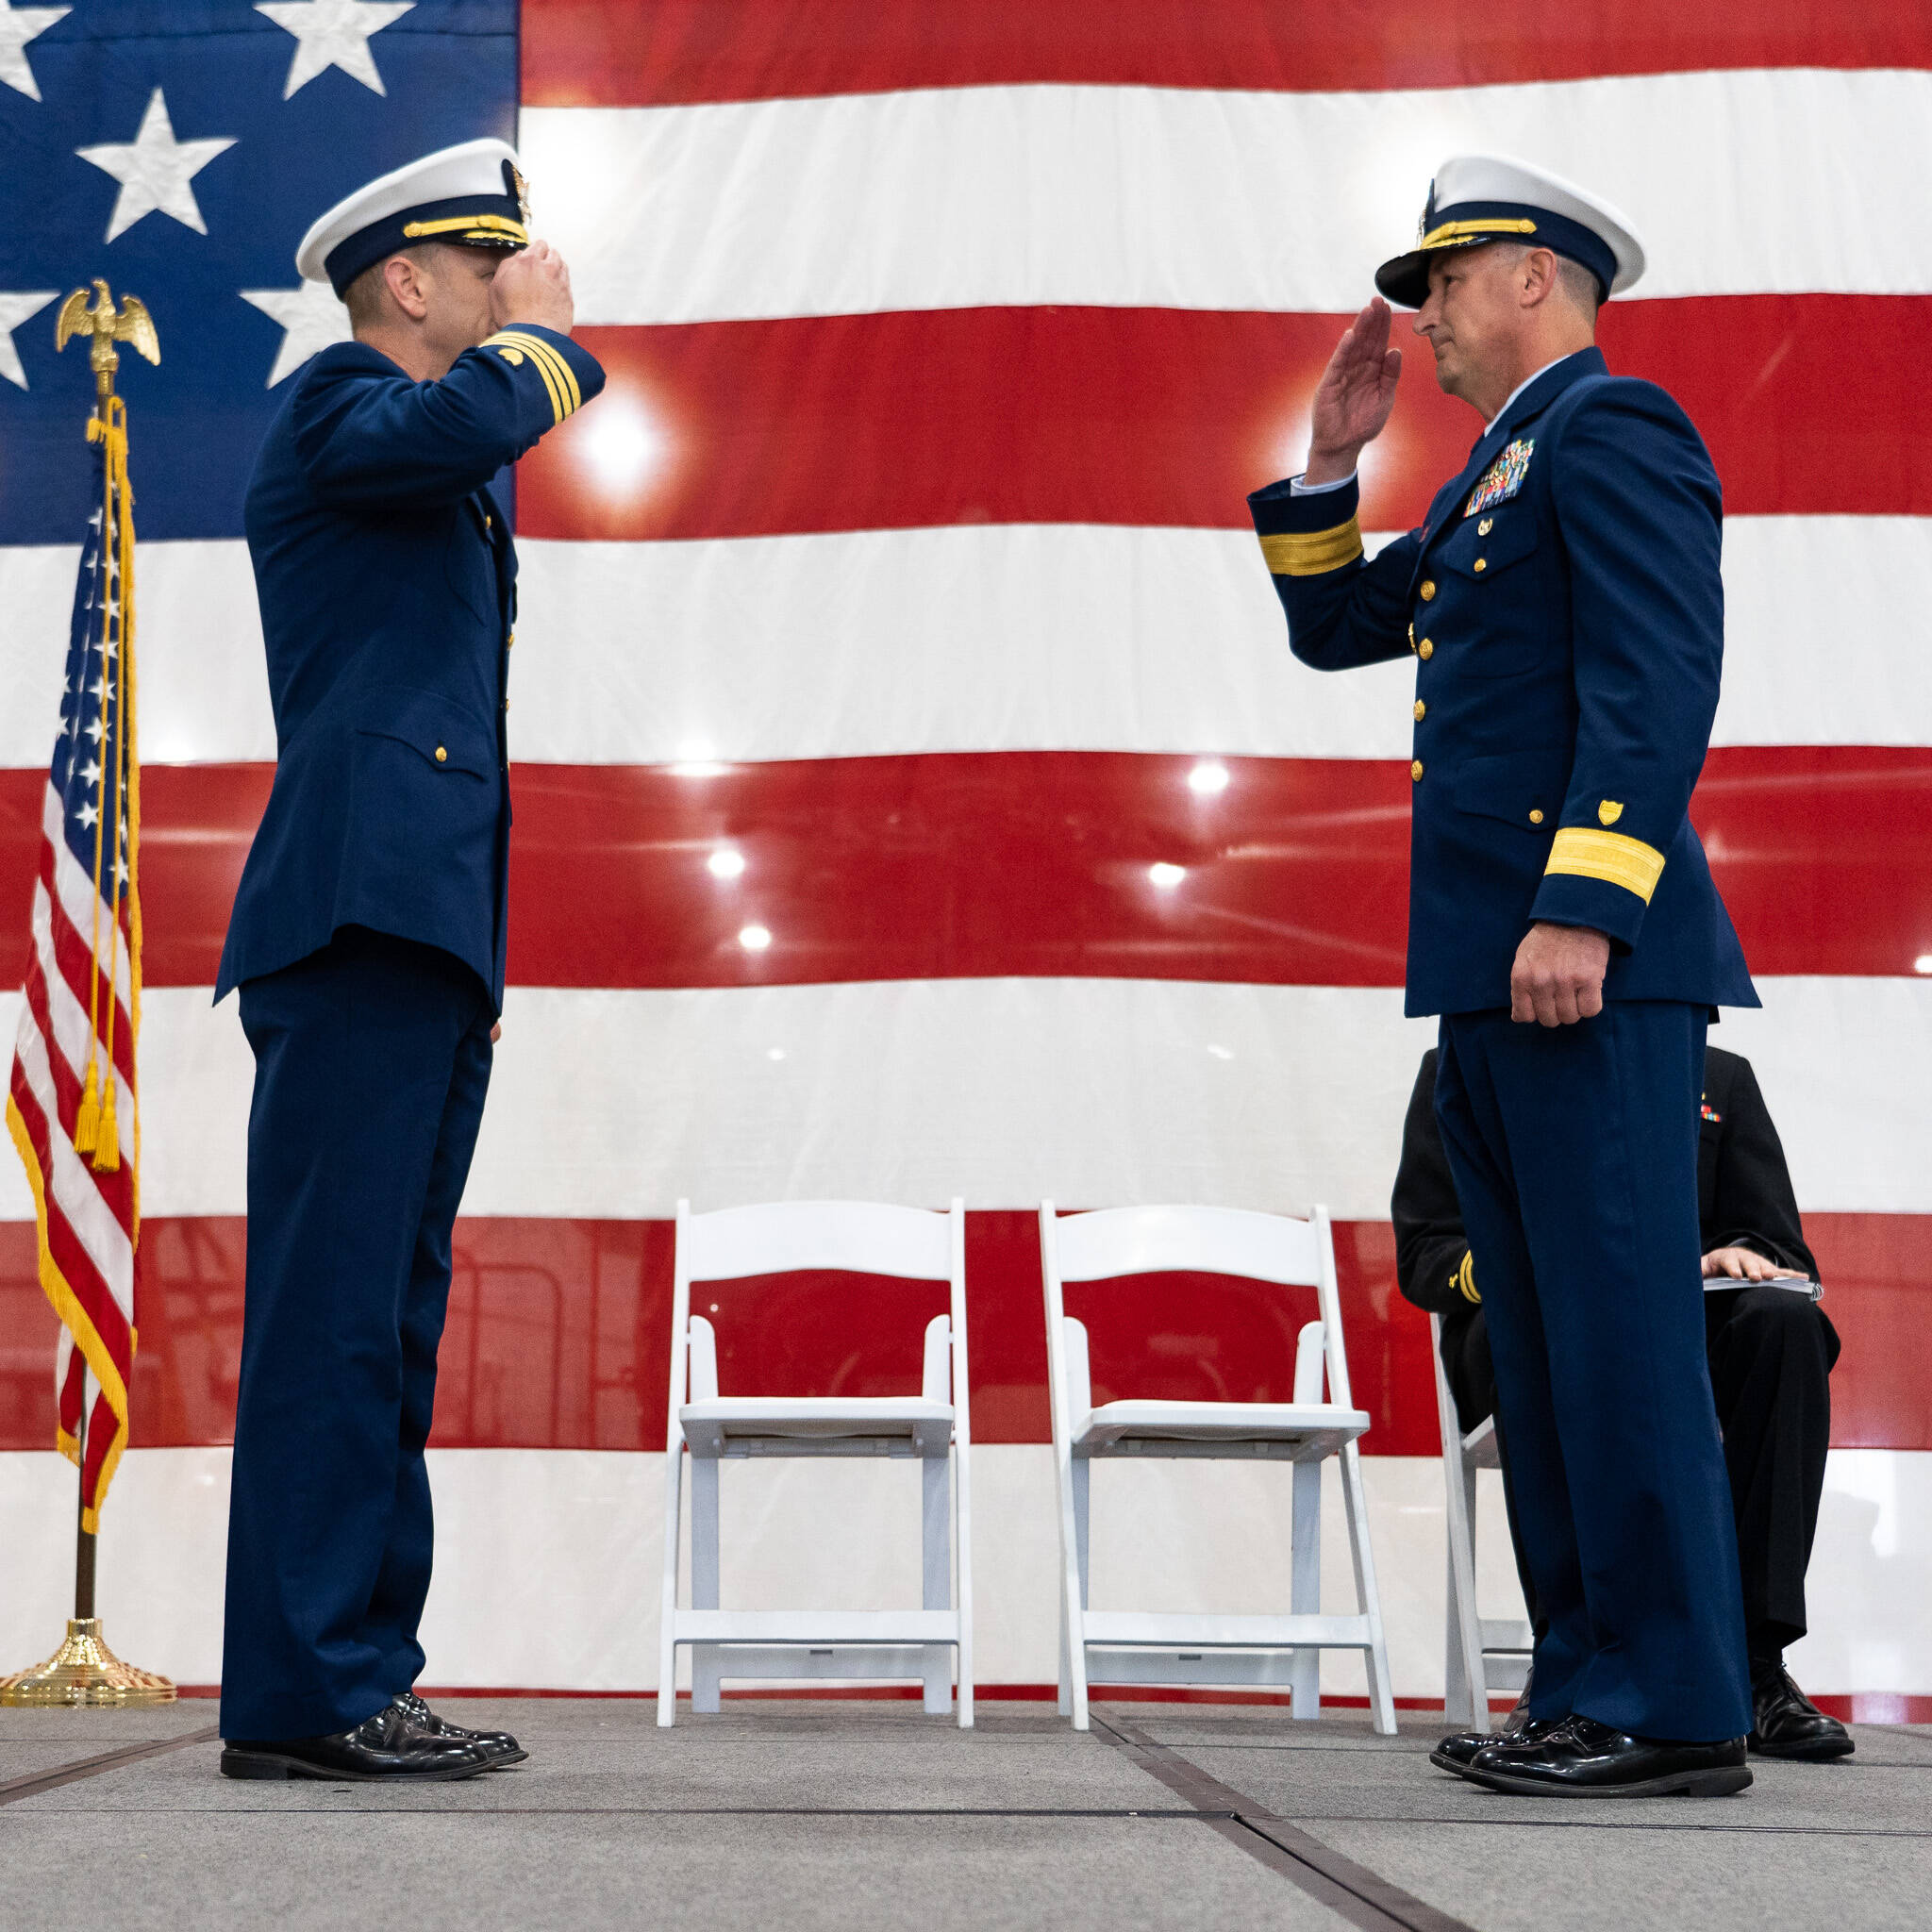 Cmdr. Todd Wimmer, the commanding officer of Base Astoria, salutes Rear Adm. Jon Hickey, the Director of Operational Logistics, during an establishment ceremony in Warrenton, Oregon, to formally establish Coast Guard Base Astoria Oct. 26. (Petty Officer 1st Class Travis Magee / USCG)